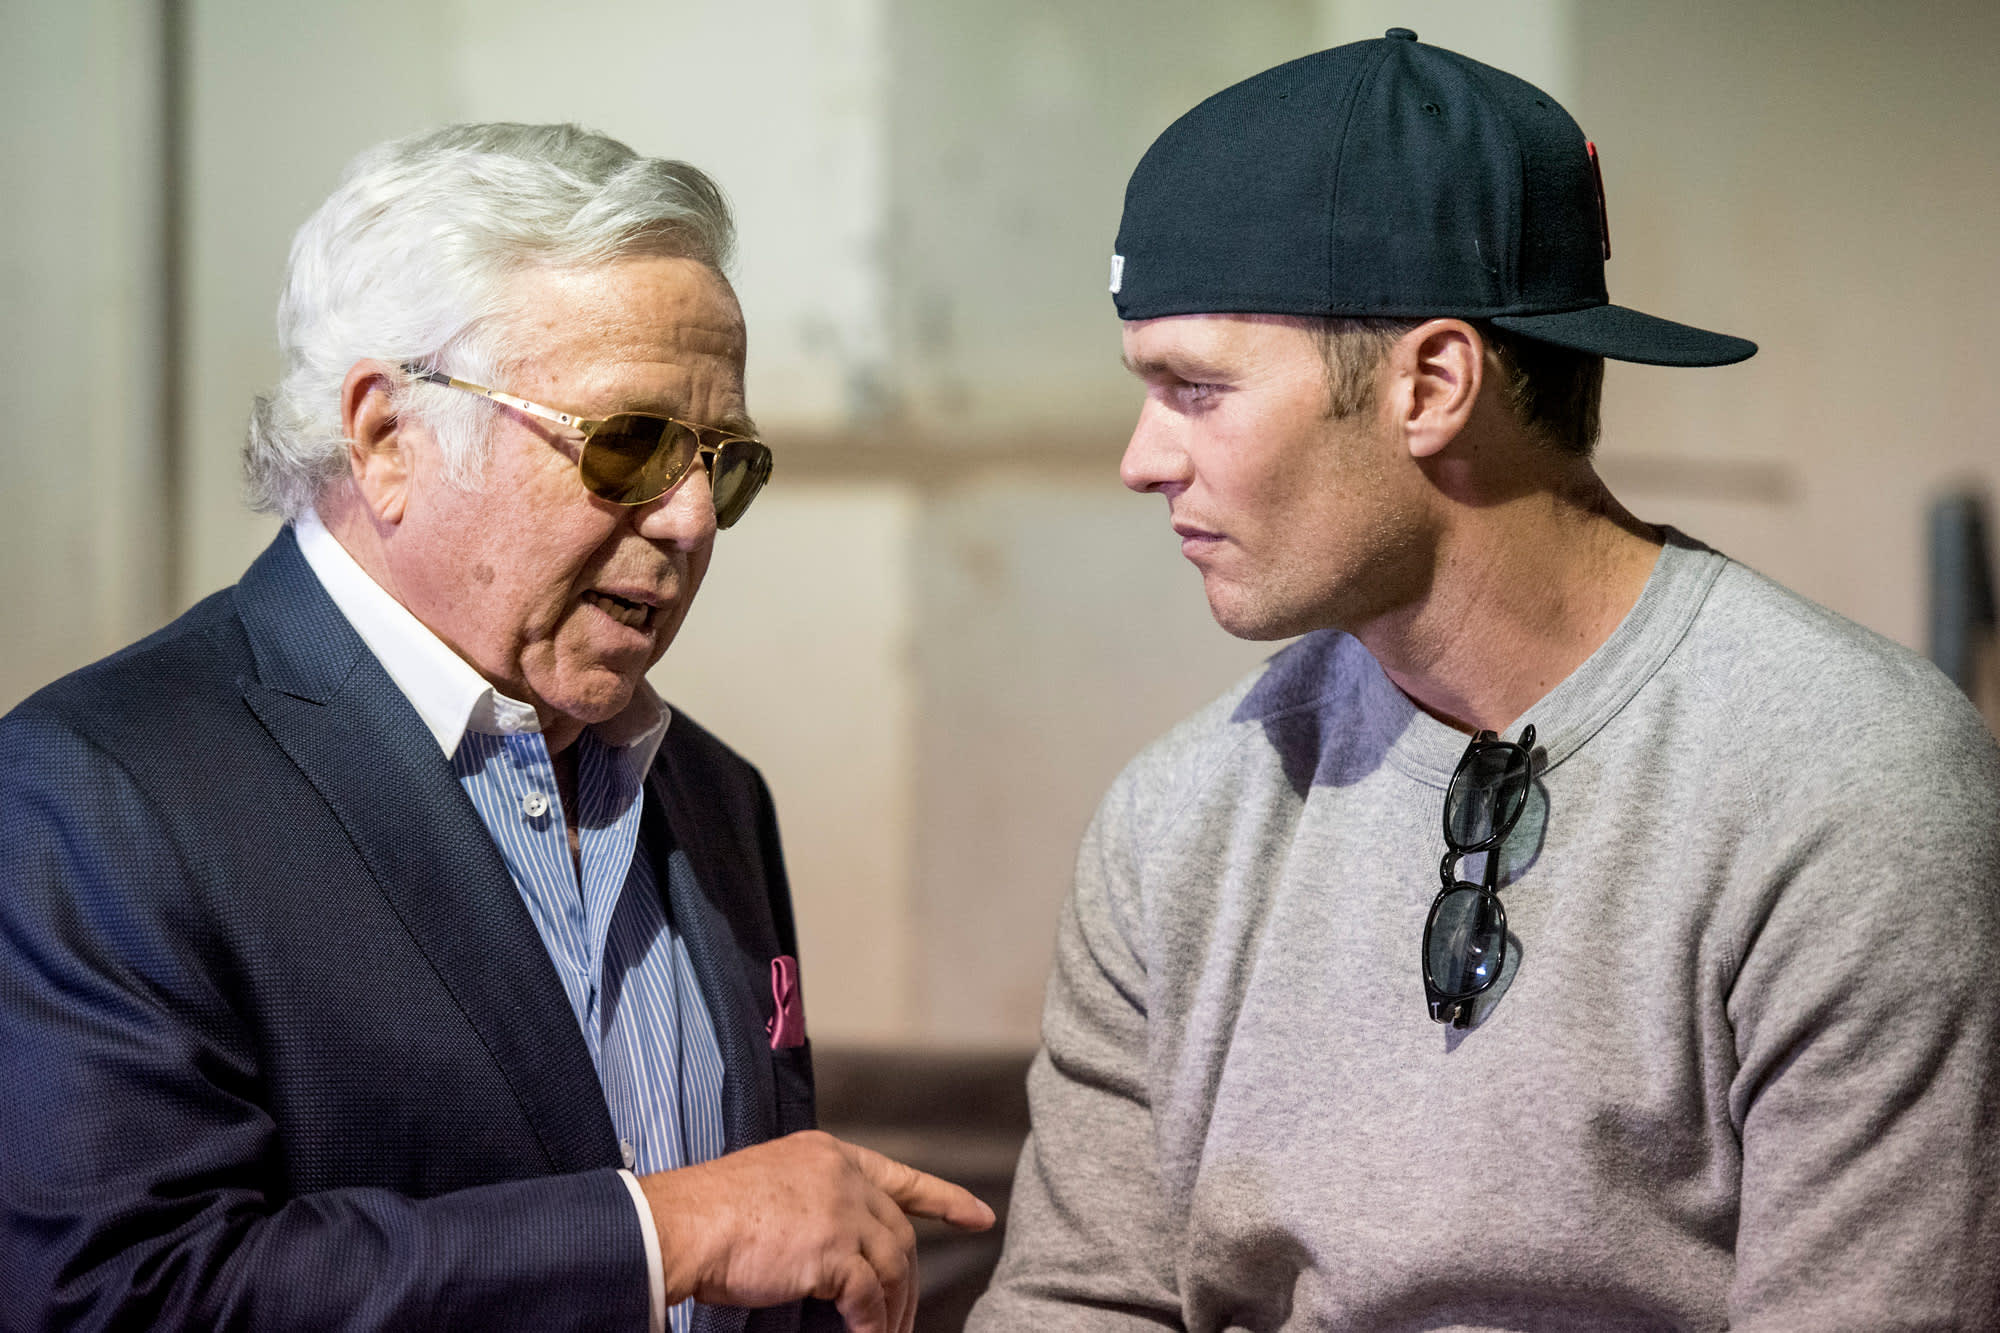 Patriots owner Bob Kraft shares a ritual he and Tom Brady have